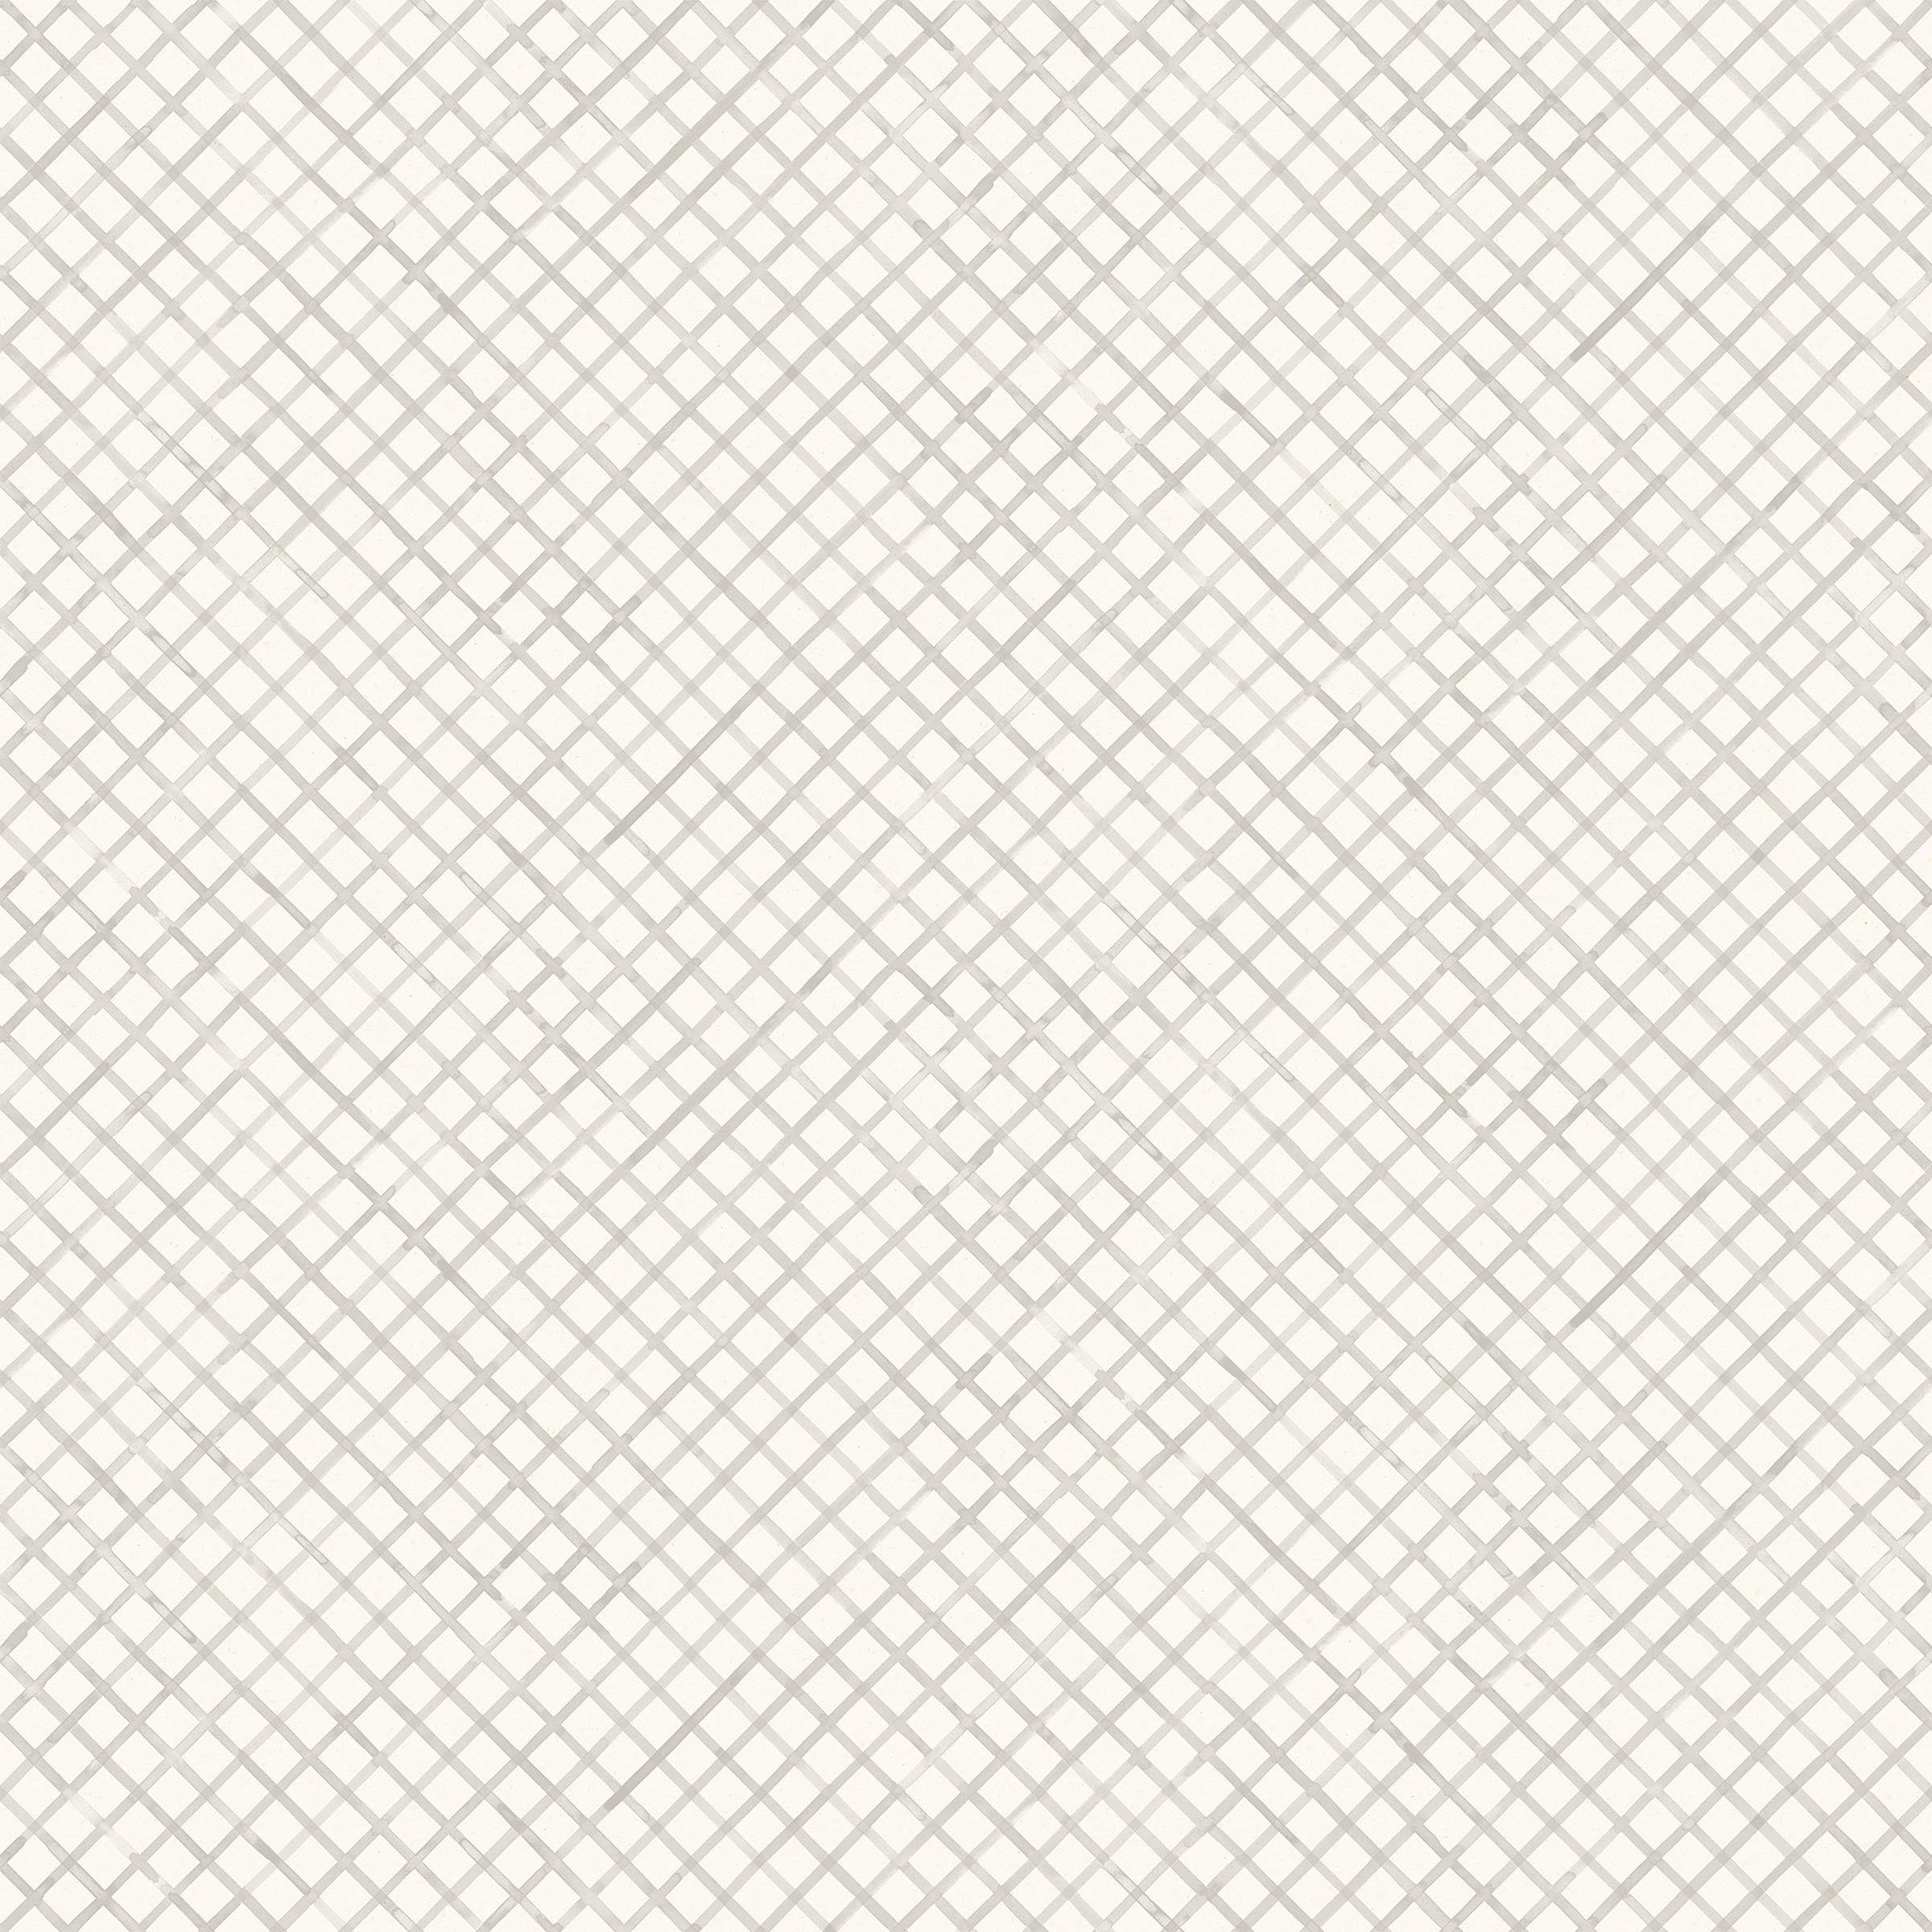 Detail of wallpaper in a painterly grid pattern in gray on a white field.